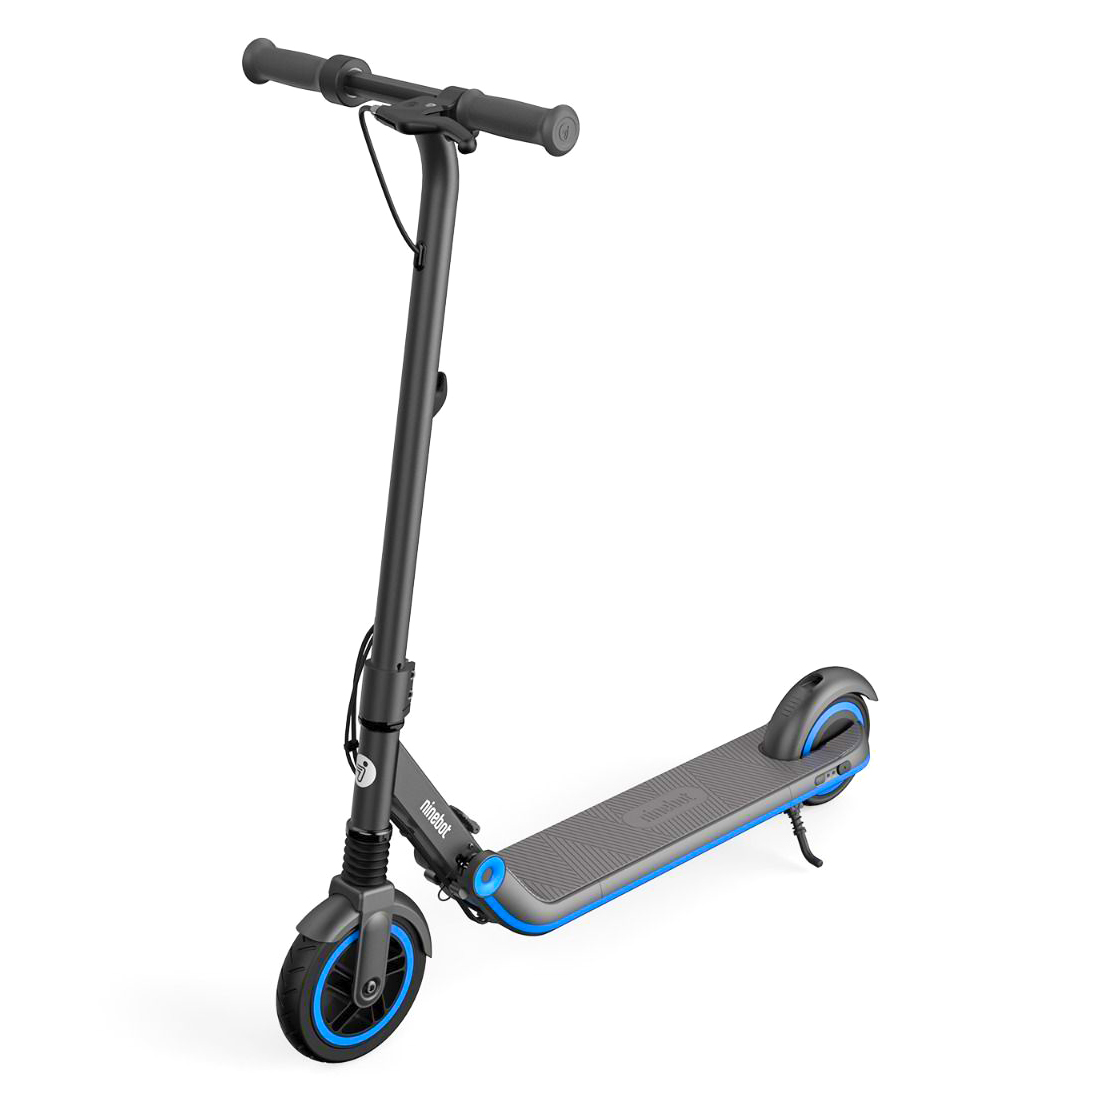 Main article image of the Nanrobot Segway Zing E10 electric scooter